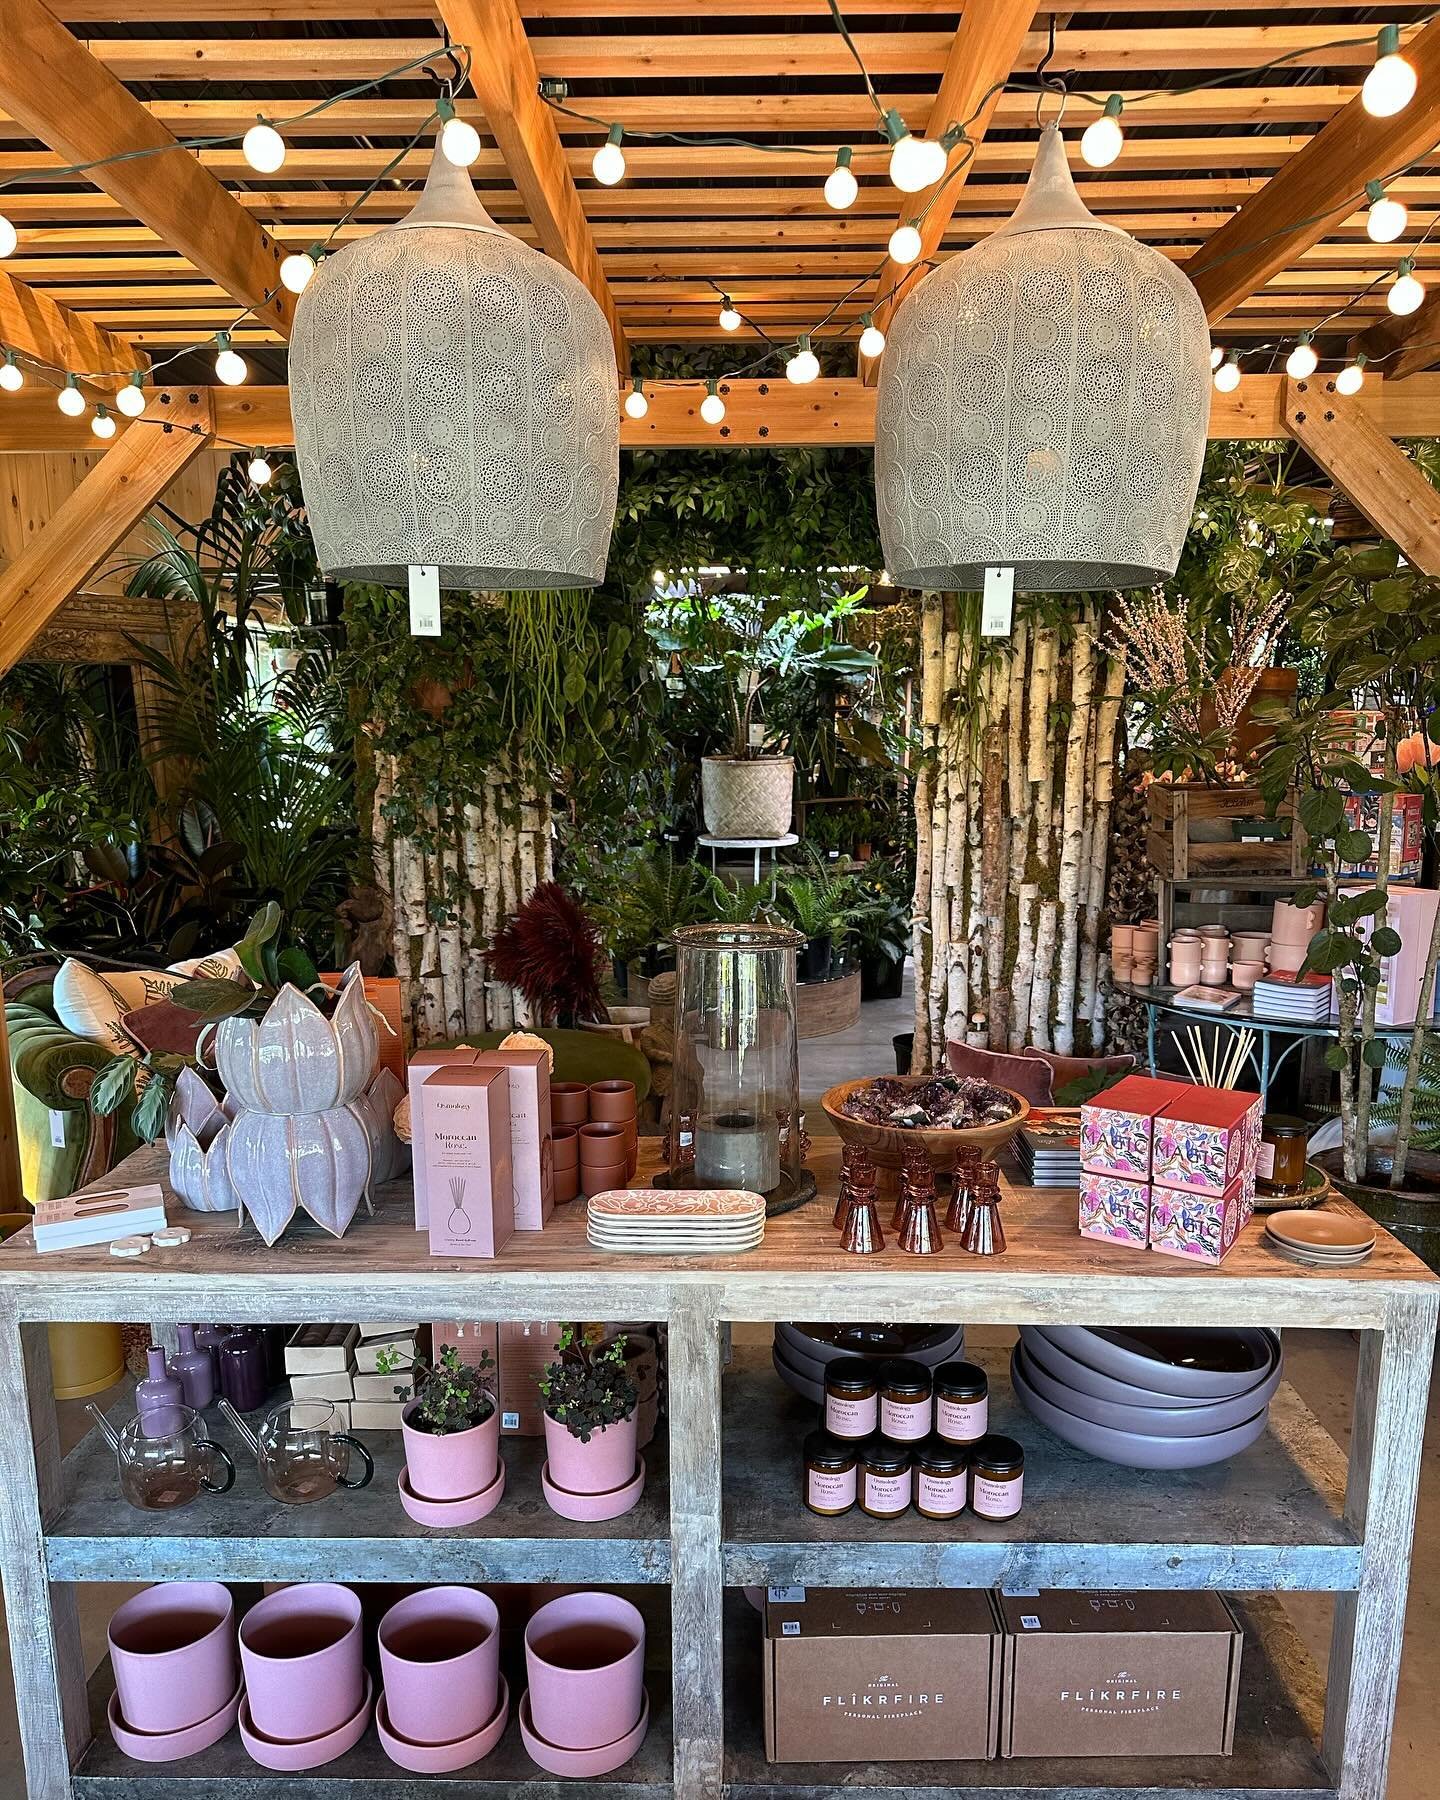 The shop and garden center are full of gorgeous indoor and outdoor plants, pots, homewares, and other treasures. 🚗 Visit our tranquil design oasis in the middle of gorgeous rural New Jersey. 

🌮 Come hungry on Saturday 4/27 as local favorites El Mo